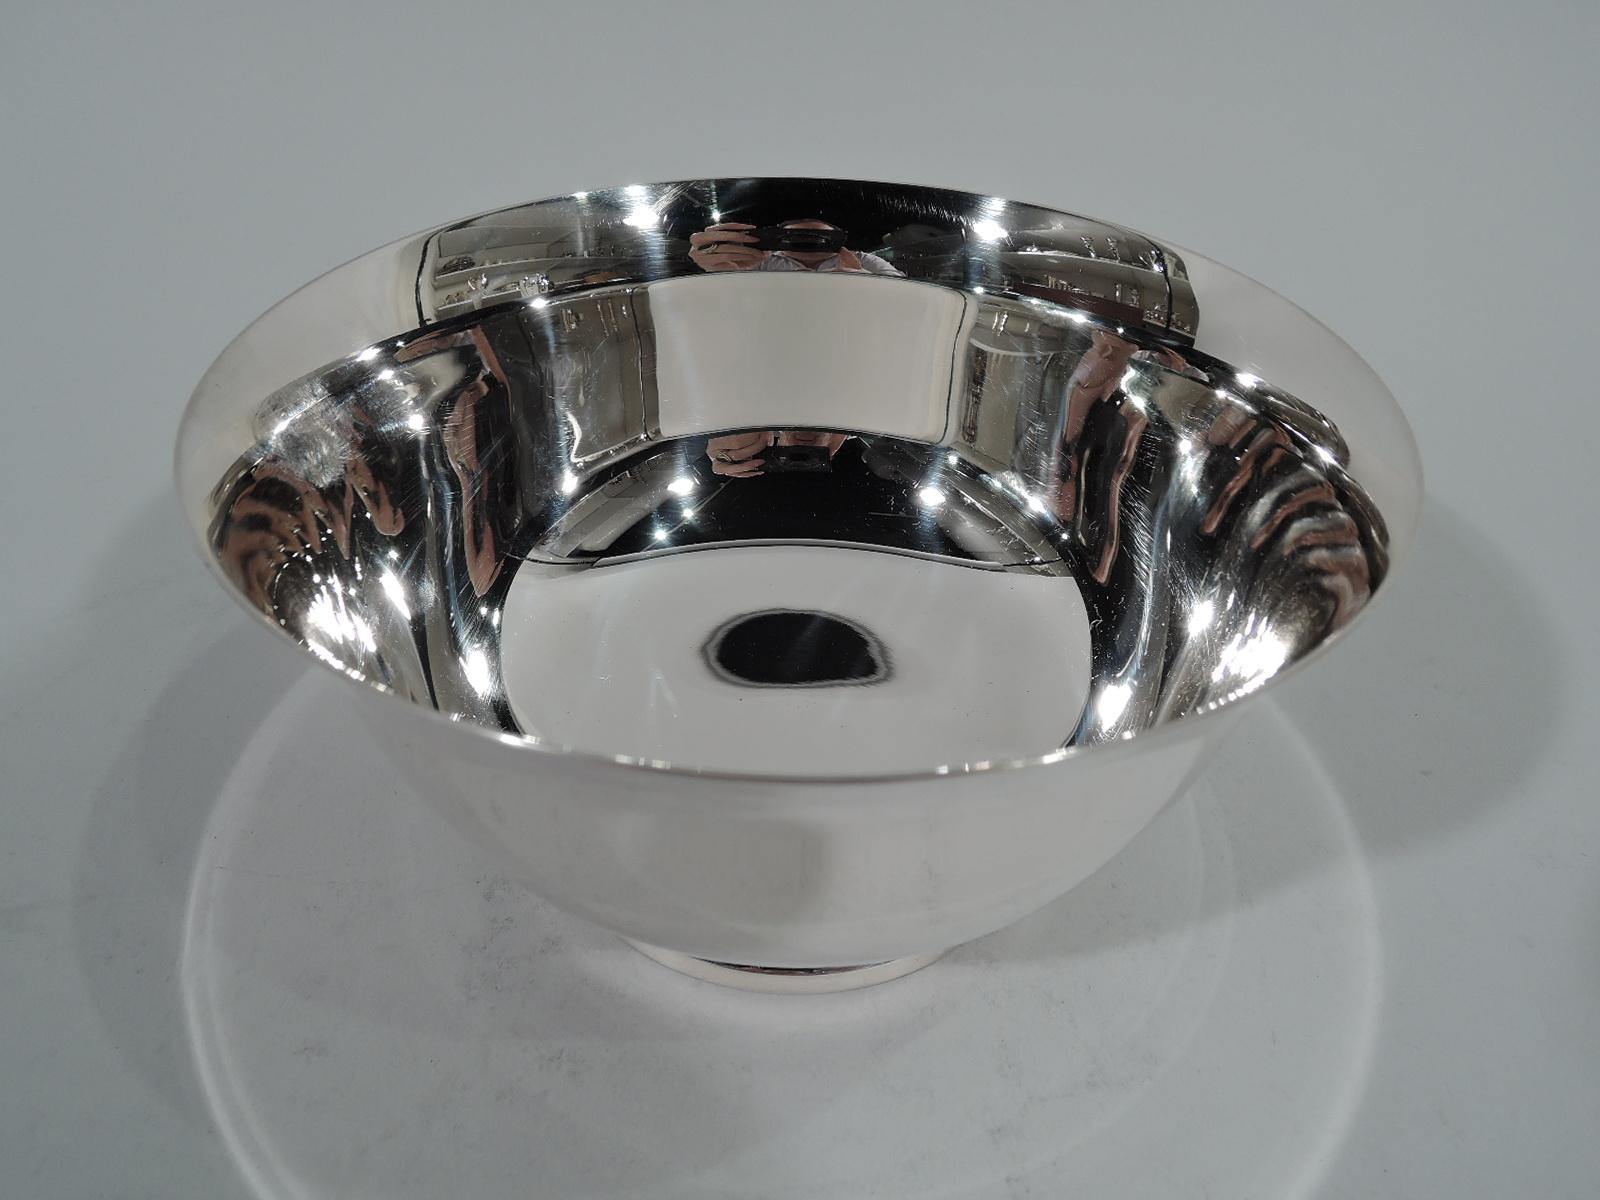 Colonial Revival sterling silver bowl. Made by Lunt in Greenfield, Mass. Traditional form with curved sides, flared rim, and stepped foot. Hallmark includes phrase “Paul Revere / Reproduction / circa / 1768” and no. 6R. Weight: 8.8 troy ounces.